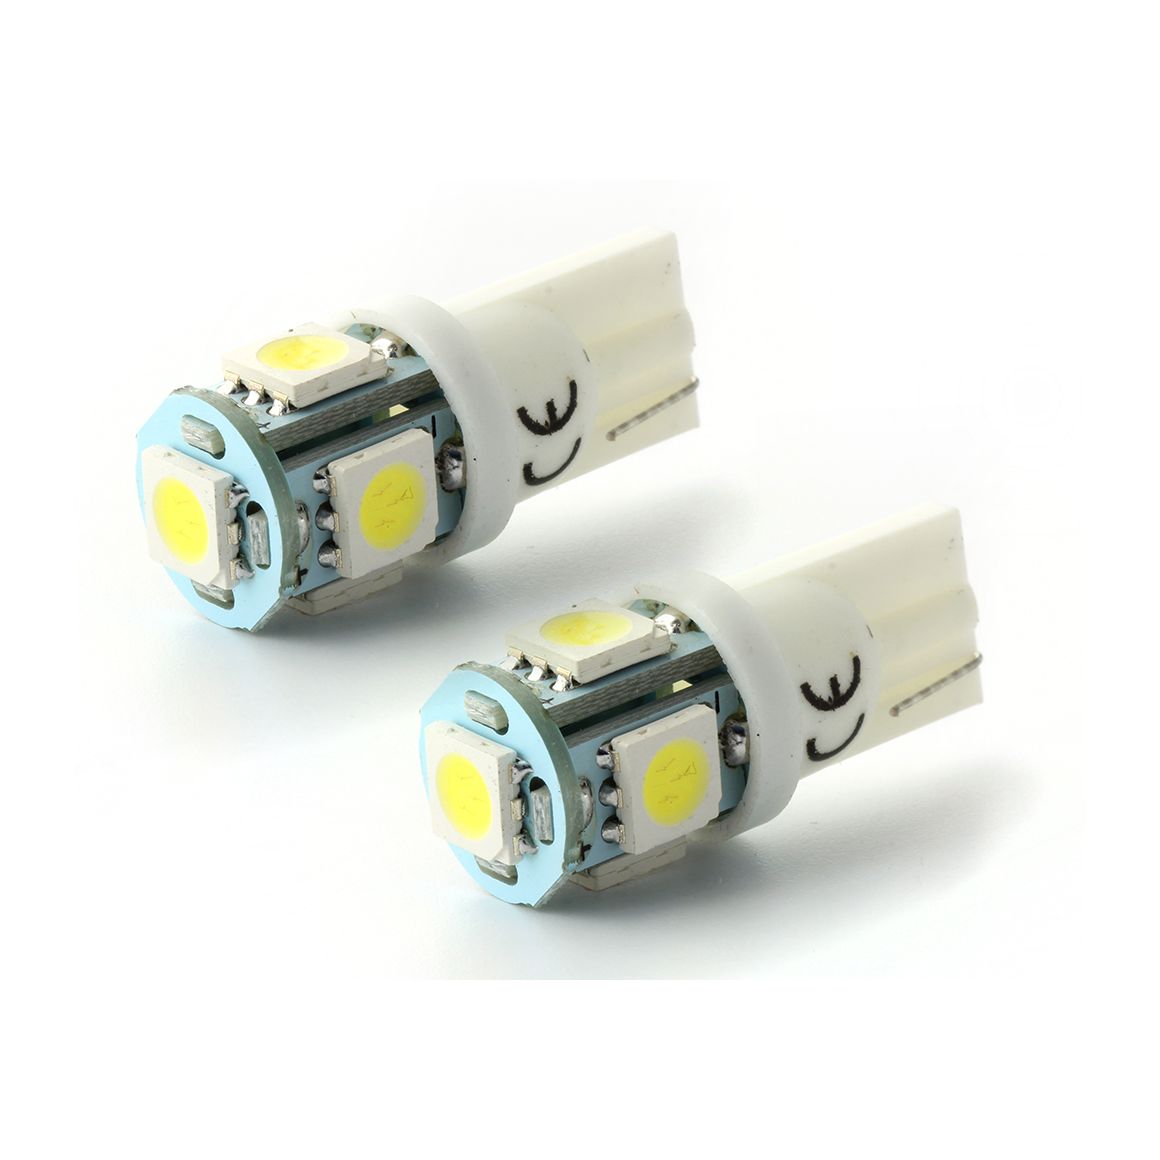 amplification painful refresh 2 x bulbs W5W T10 24V - 5 LED SMD white